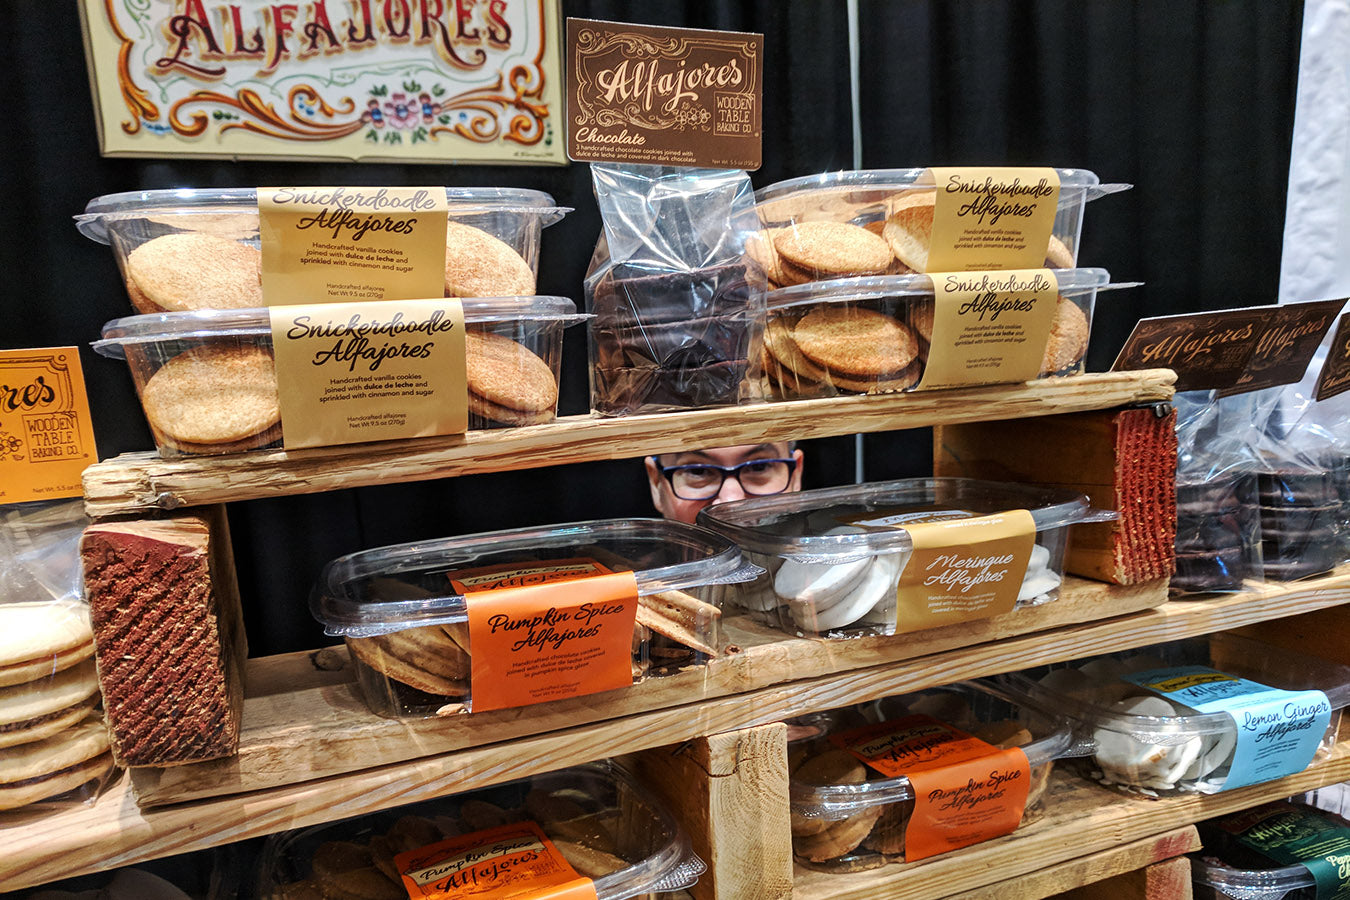 We ate our way through the Fancy Food Show again